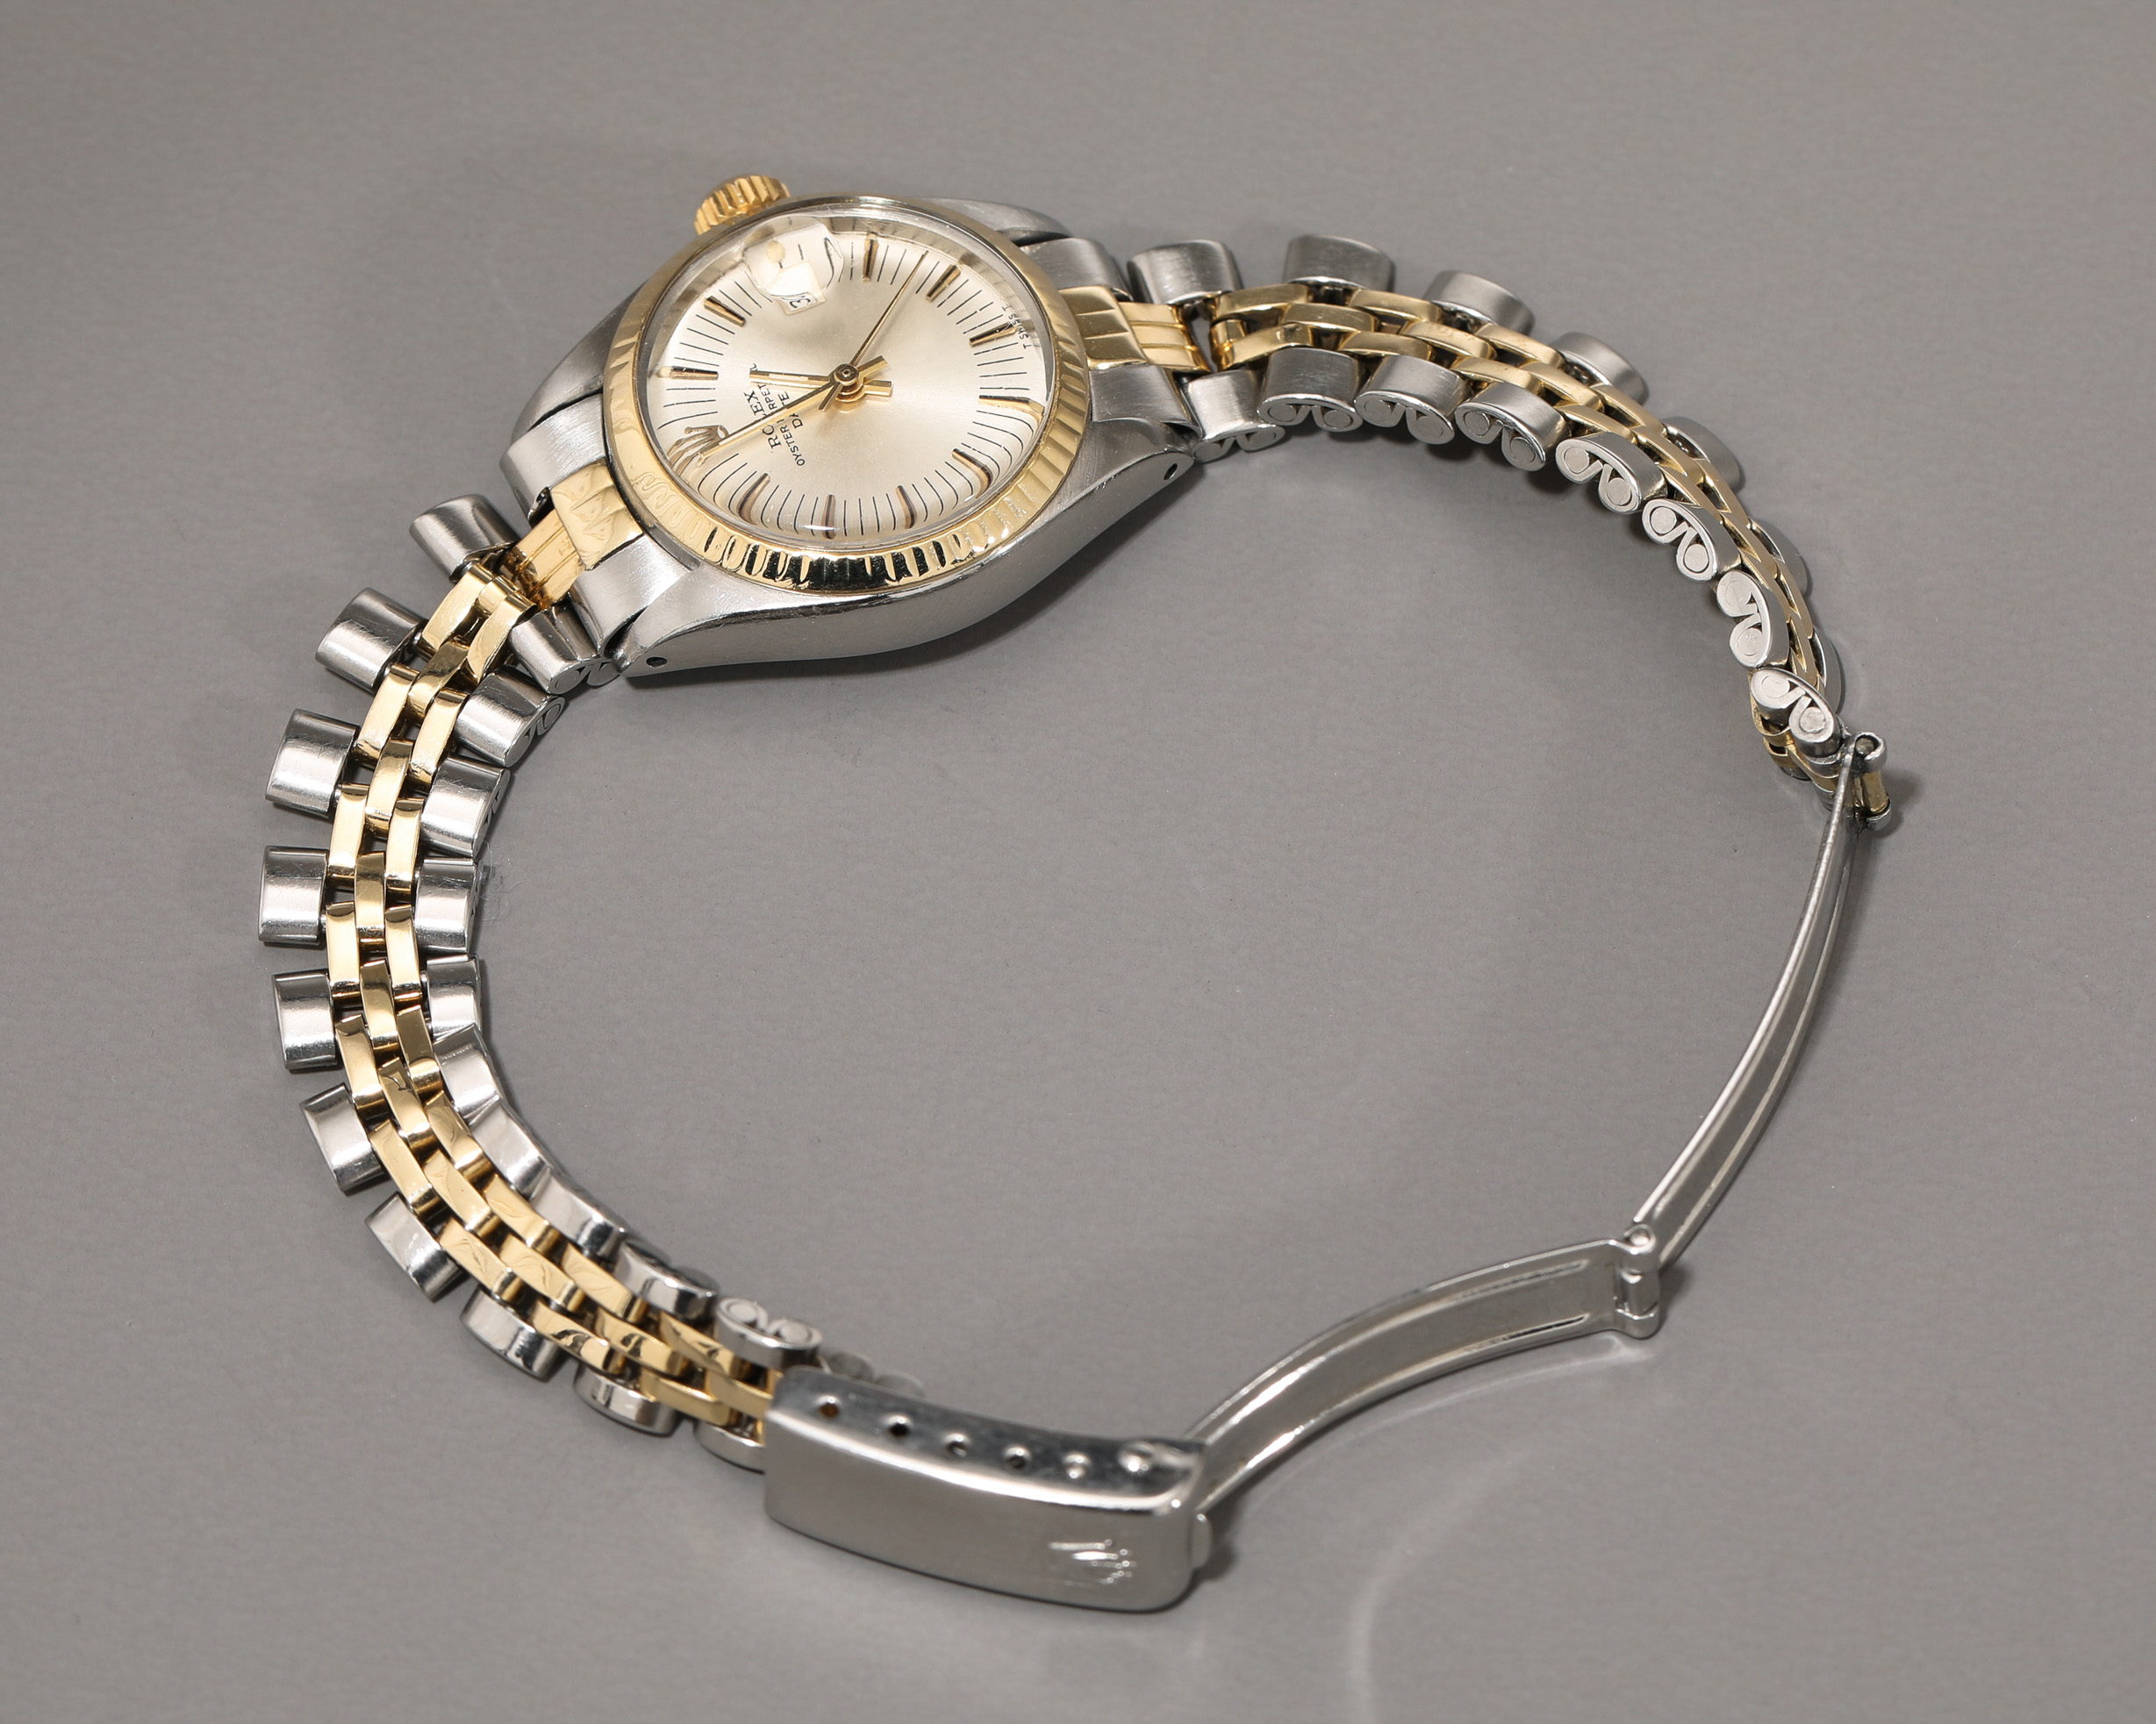 Rolex Oyster Perpetual Lady Date Ref. 6917. Automatic women's watch - Image 8 of 9